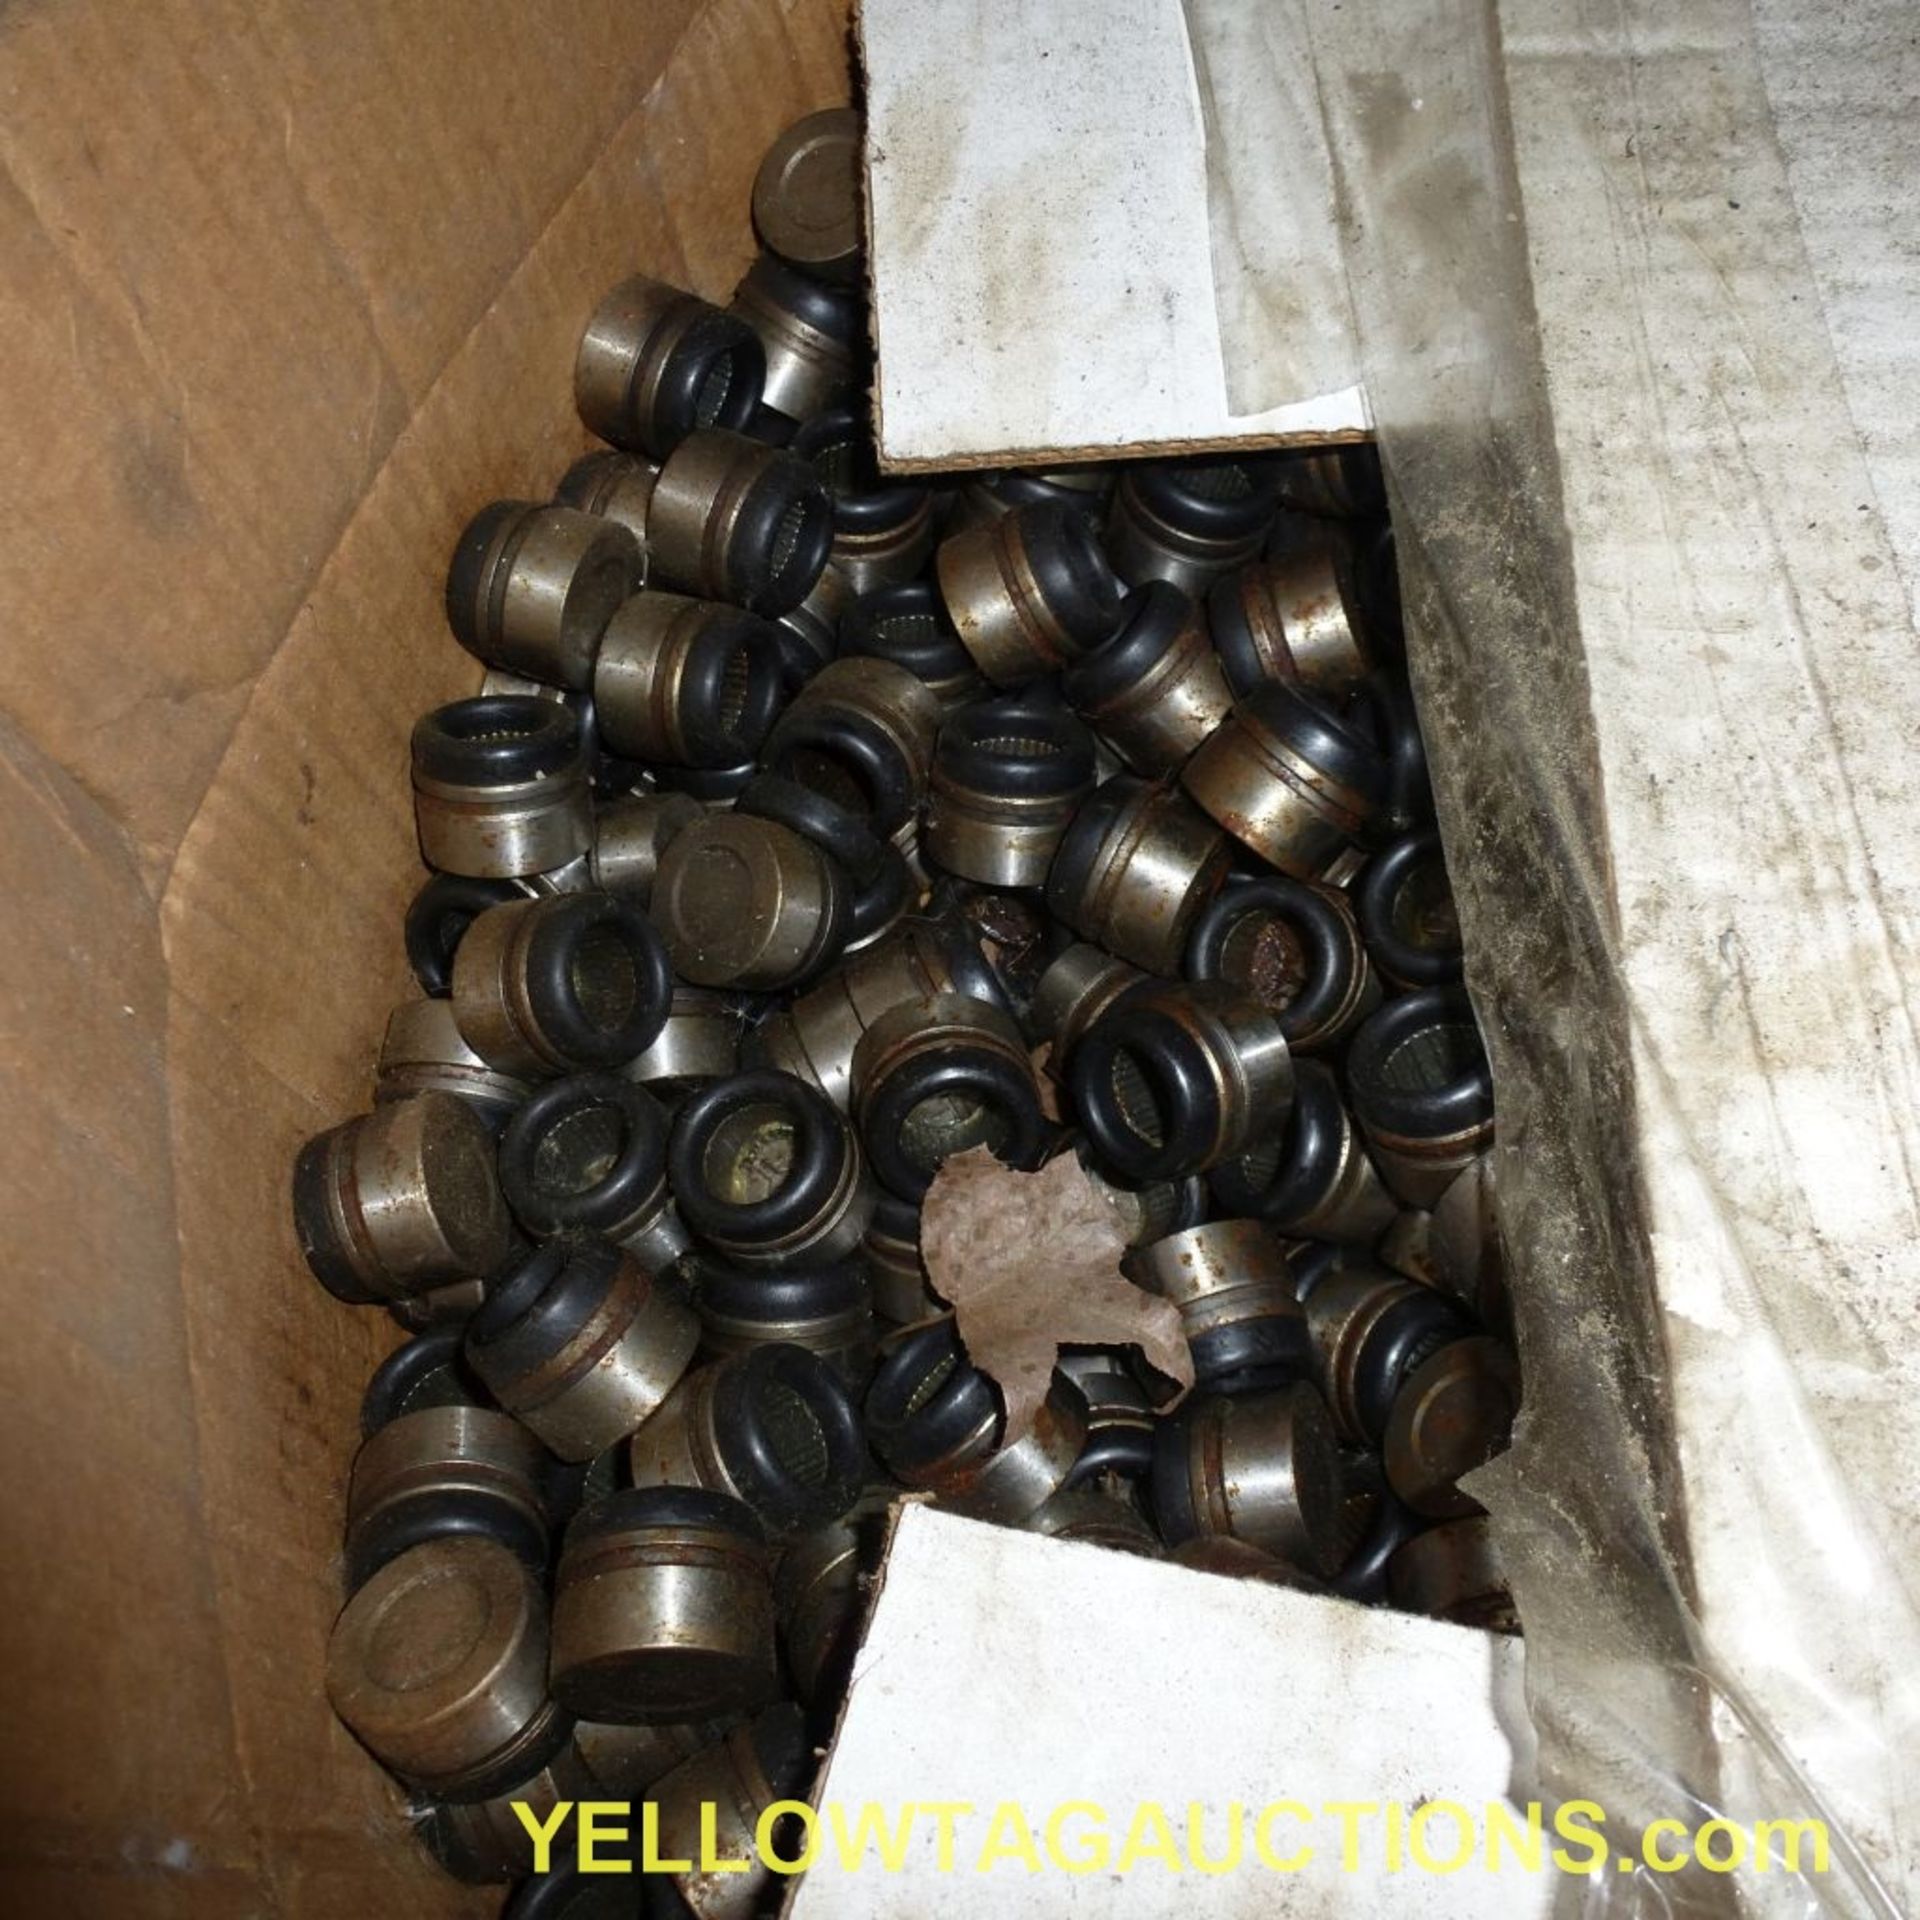 Lot of Approx. (16,000) Universal Joint Cups with Needle Bearings|Bearing Part No. 35RN-201B|Tag: